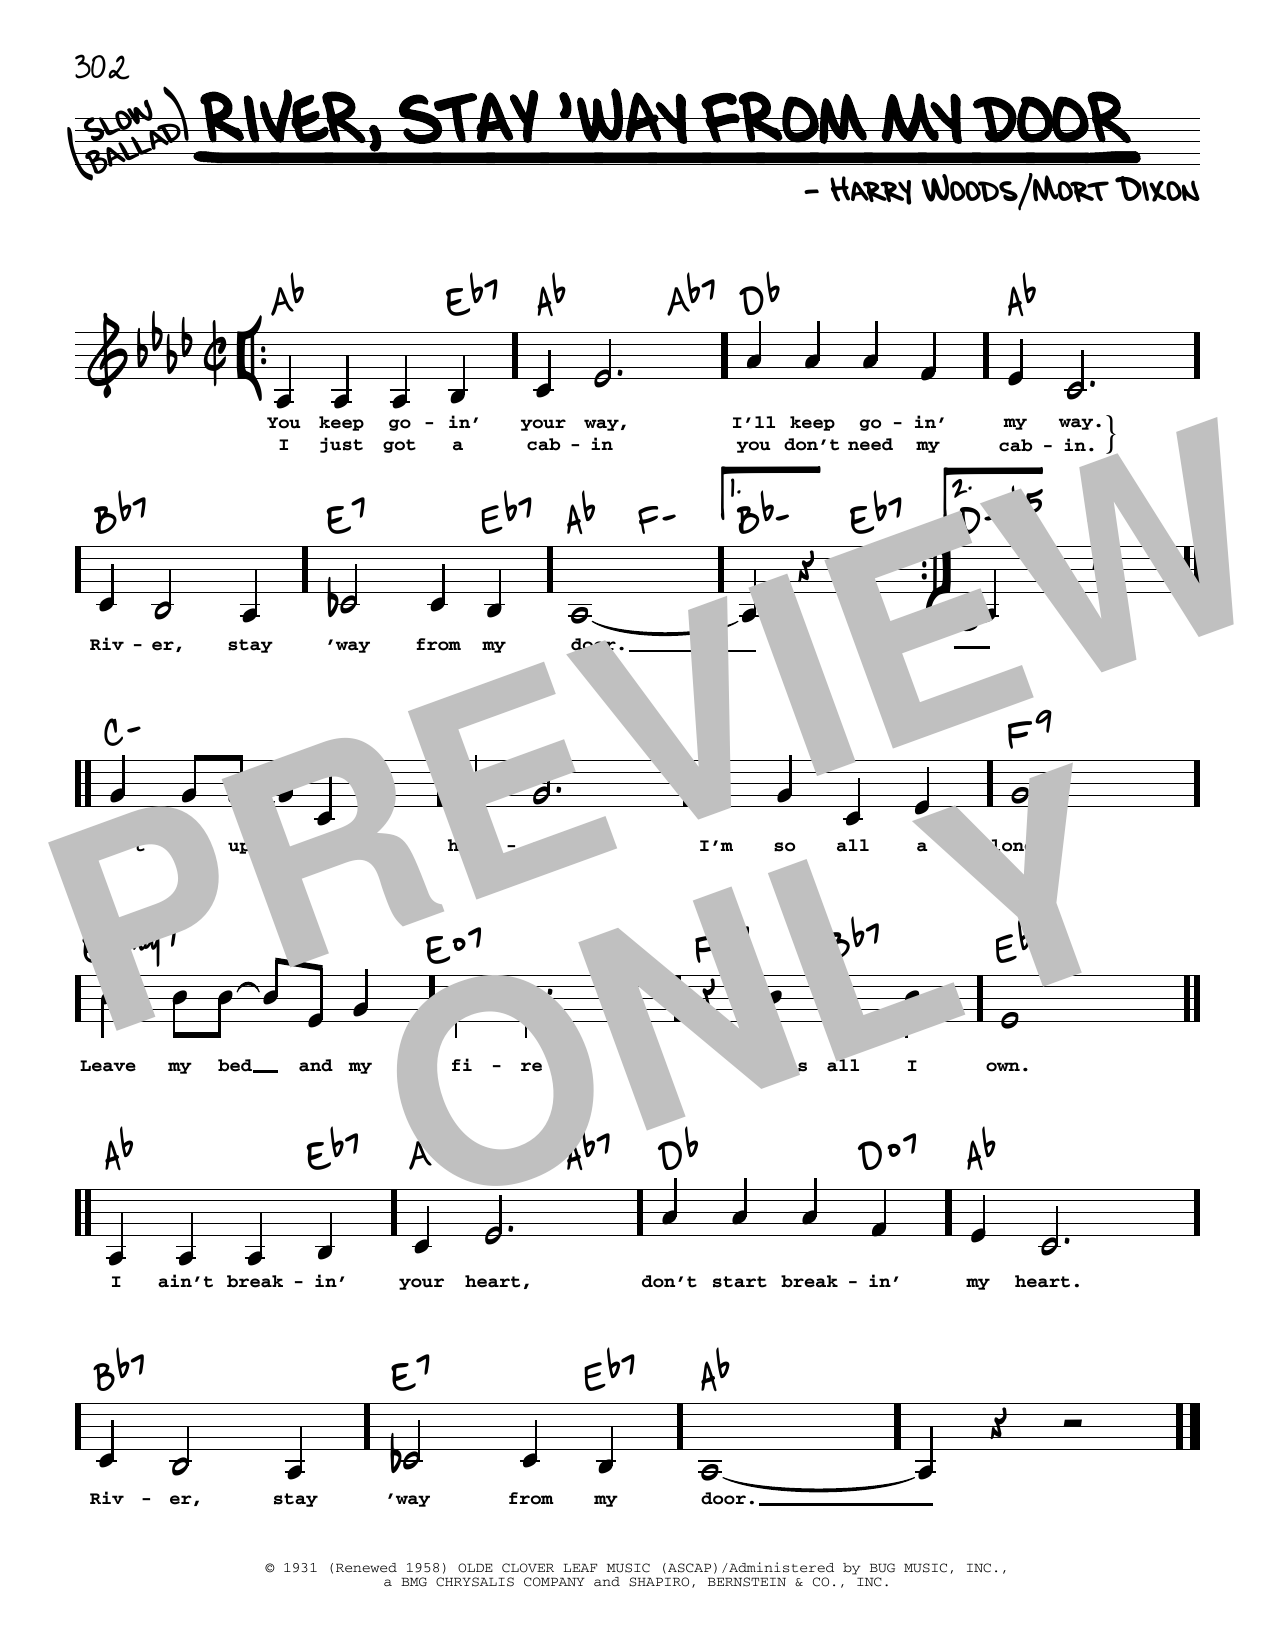 Frank Sinatra River, Stay 'Way From My Door (Low Voice) sheet music notes printable PDF score